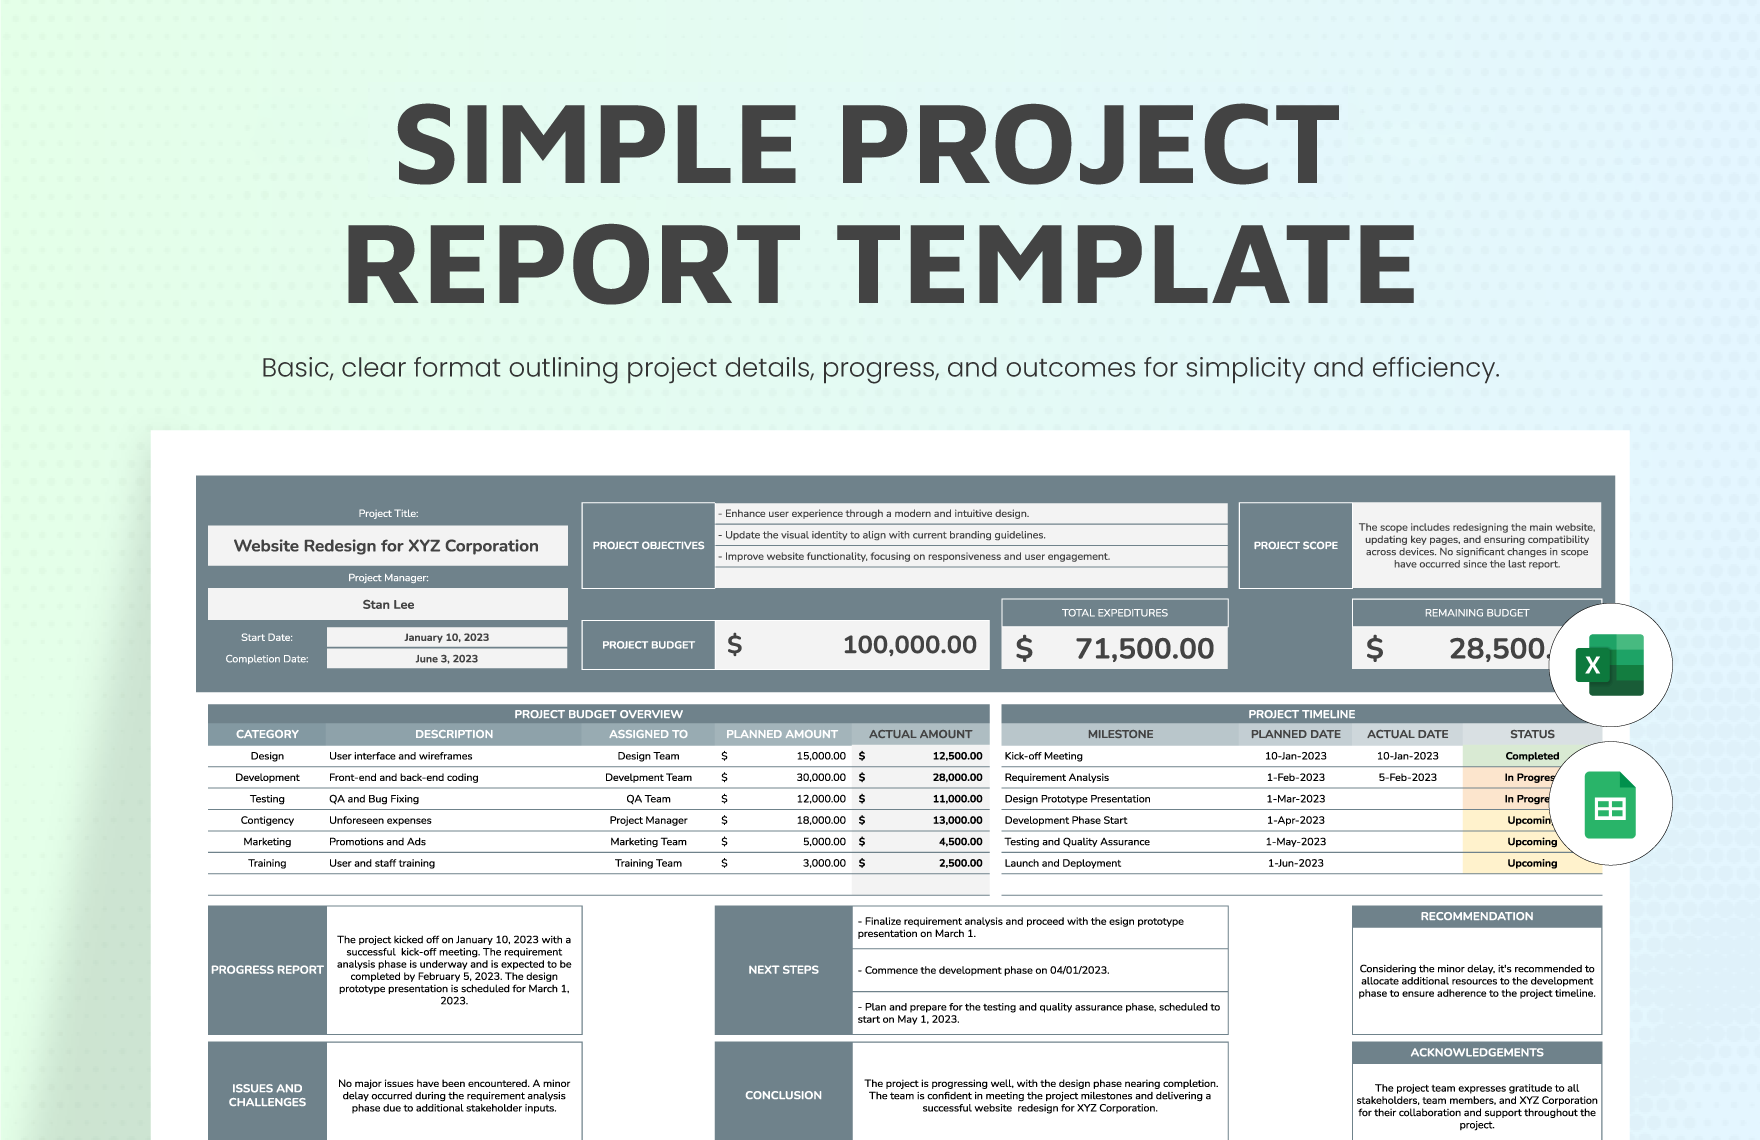 Simple Project Report Template in Excel, Google Sheets